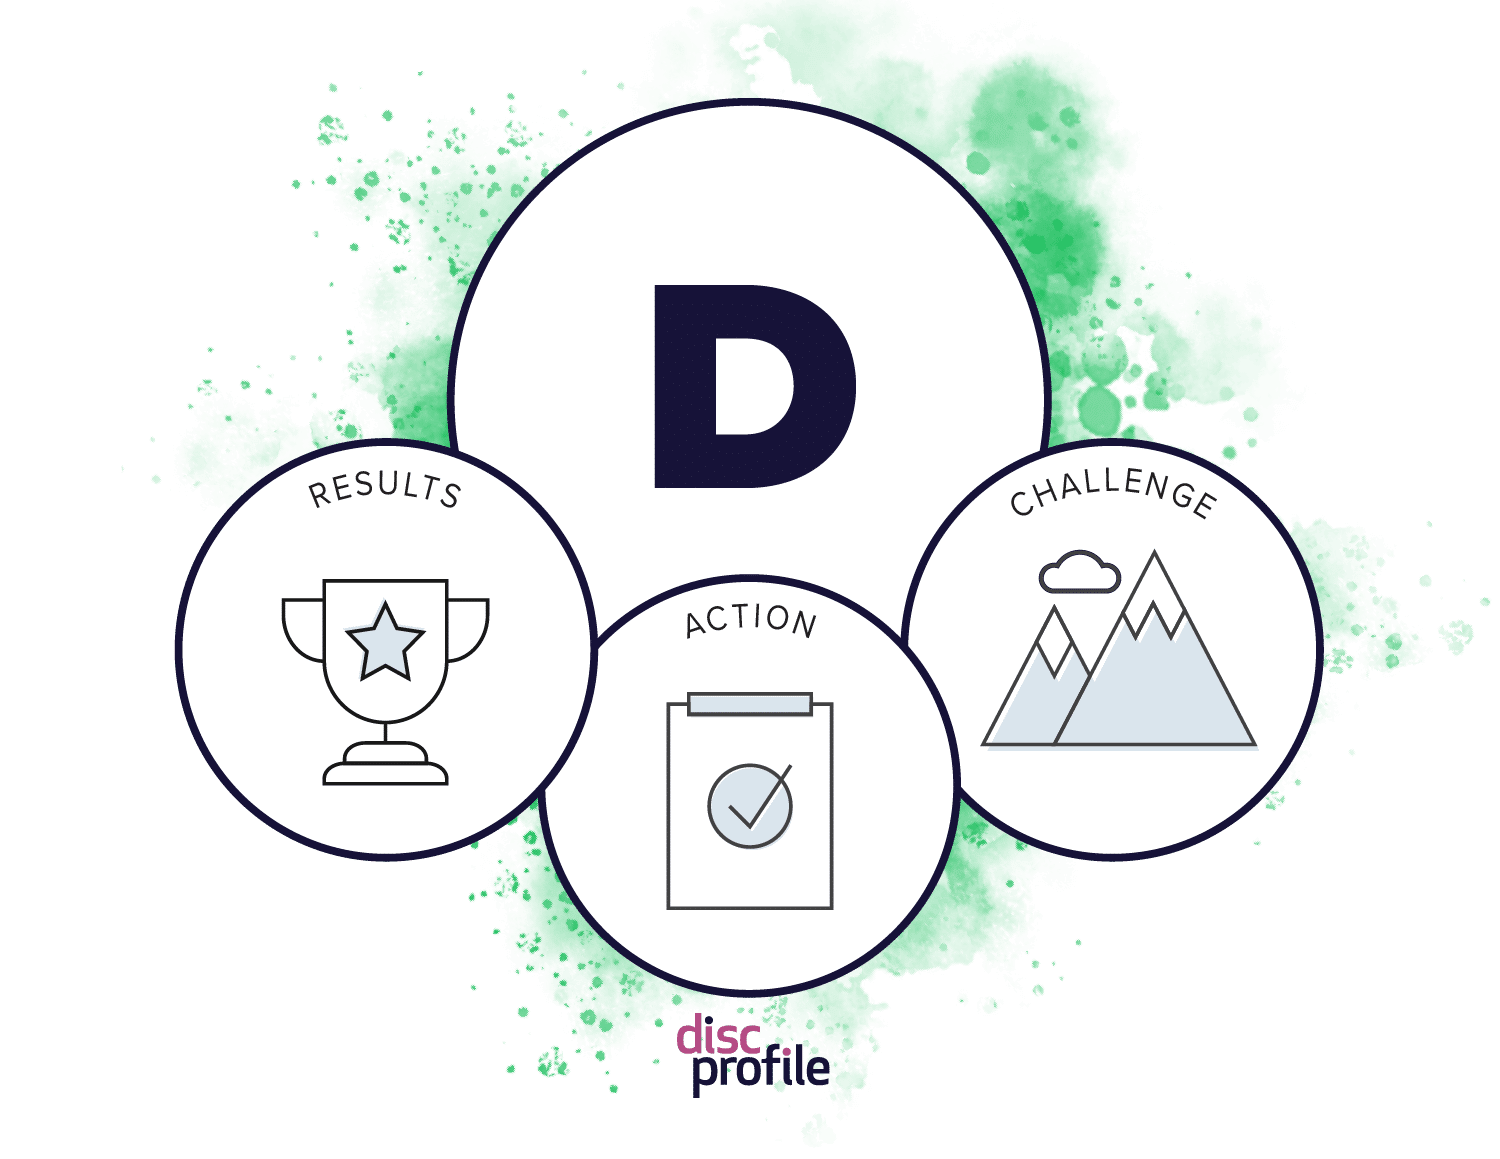 D style image with priorities of results, action, and challenge